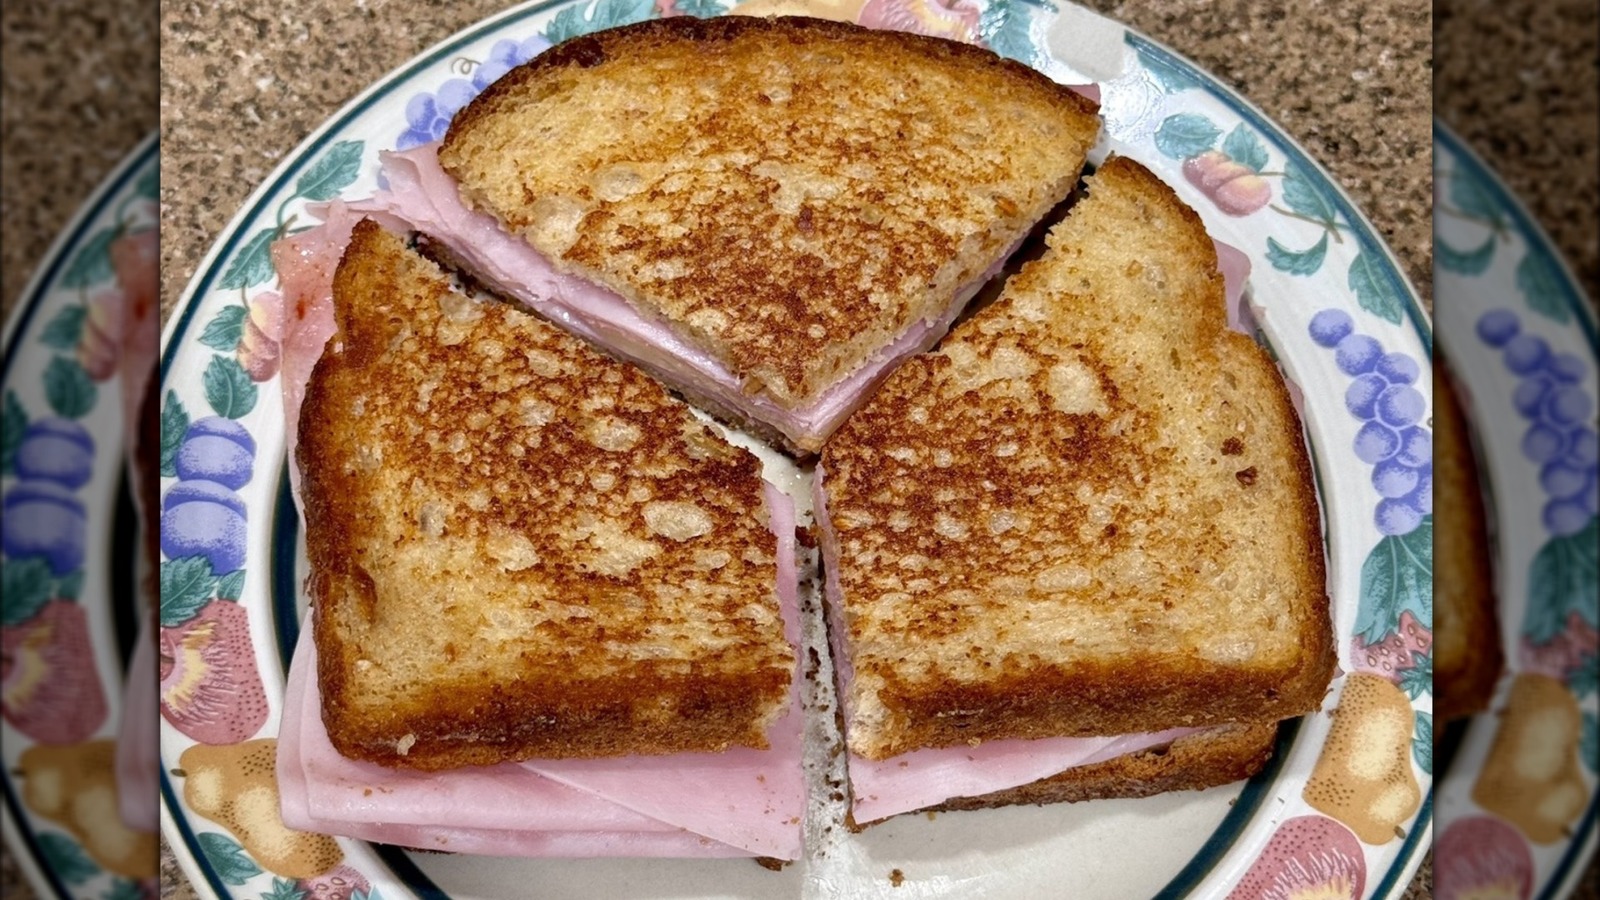 The Viral Sandwich Cutting Hack We Can't Decide If We Love Or Hate